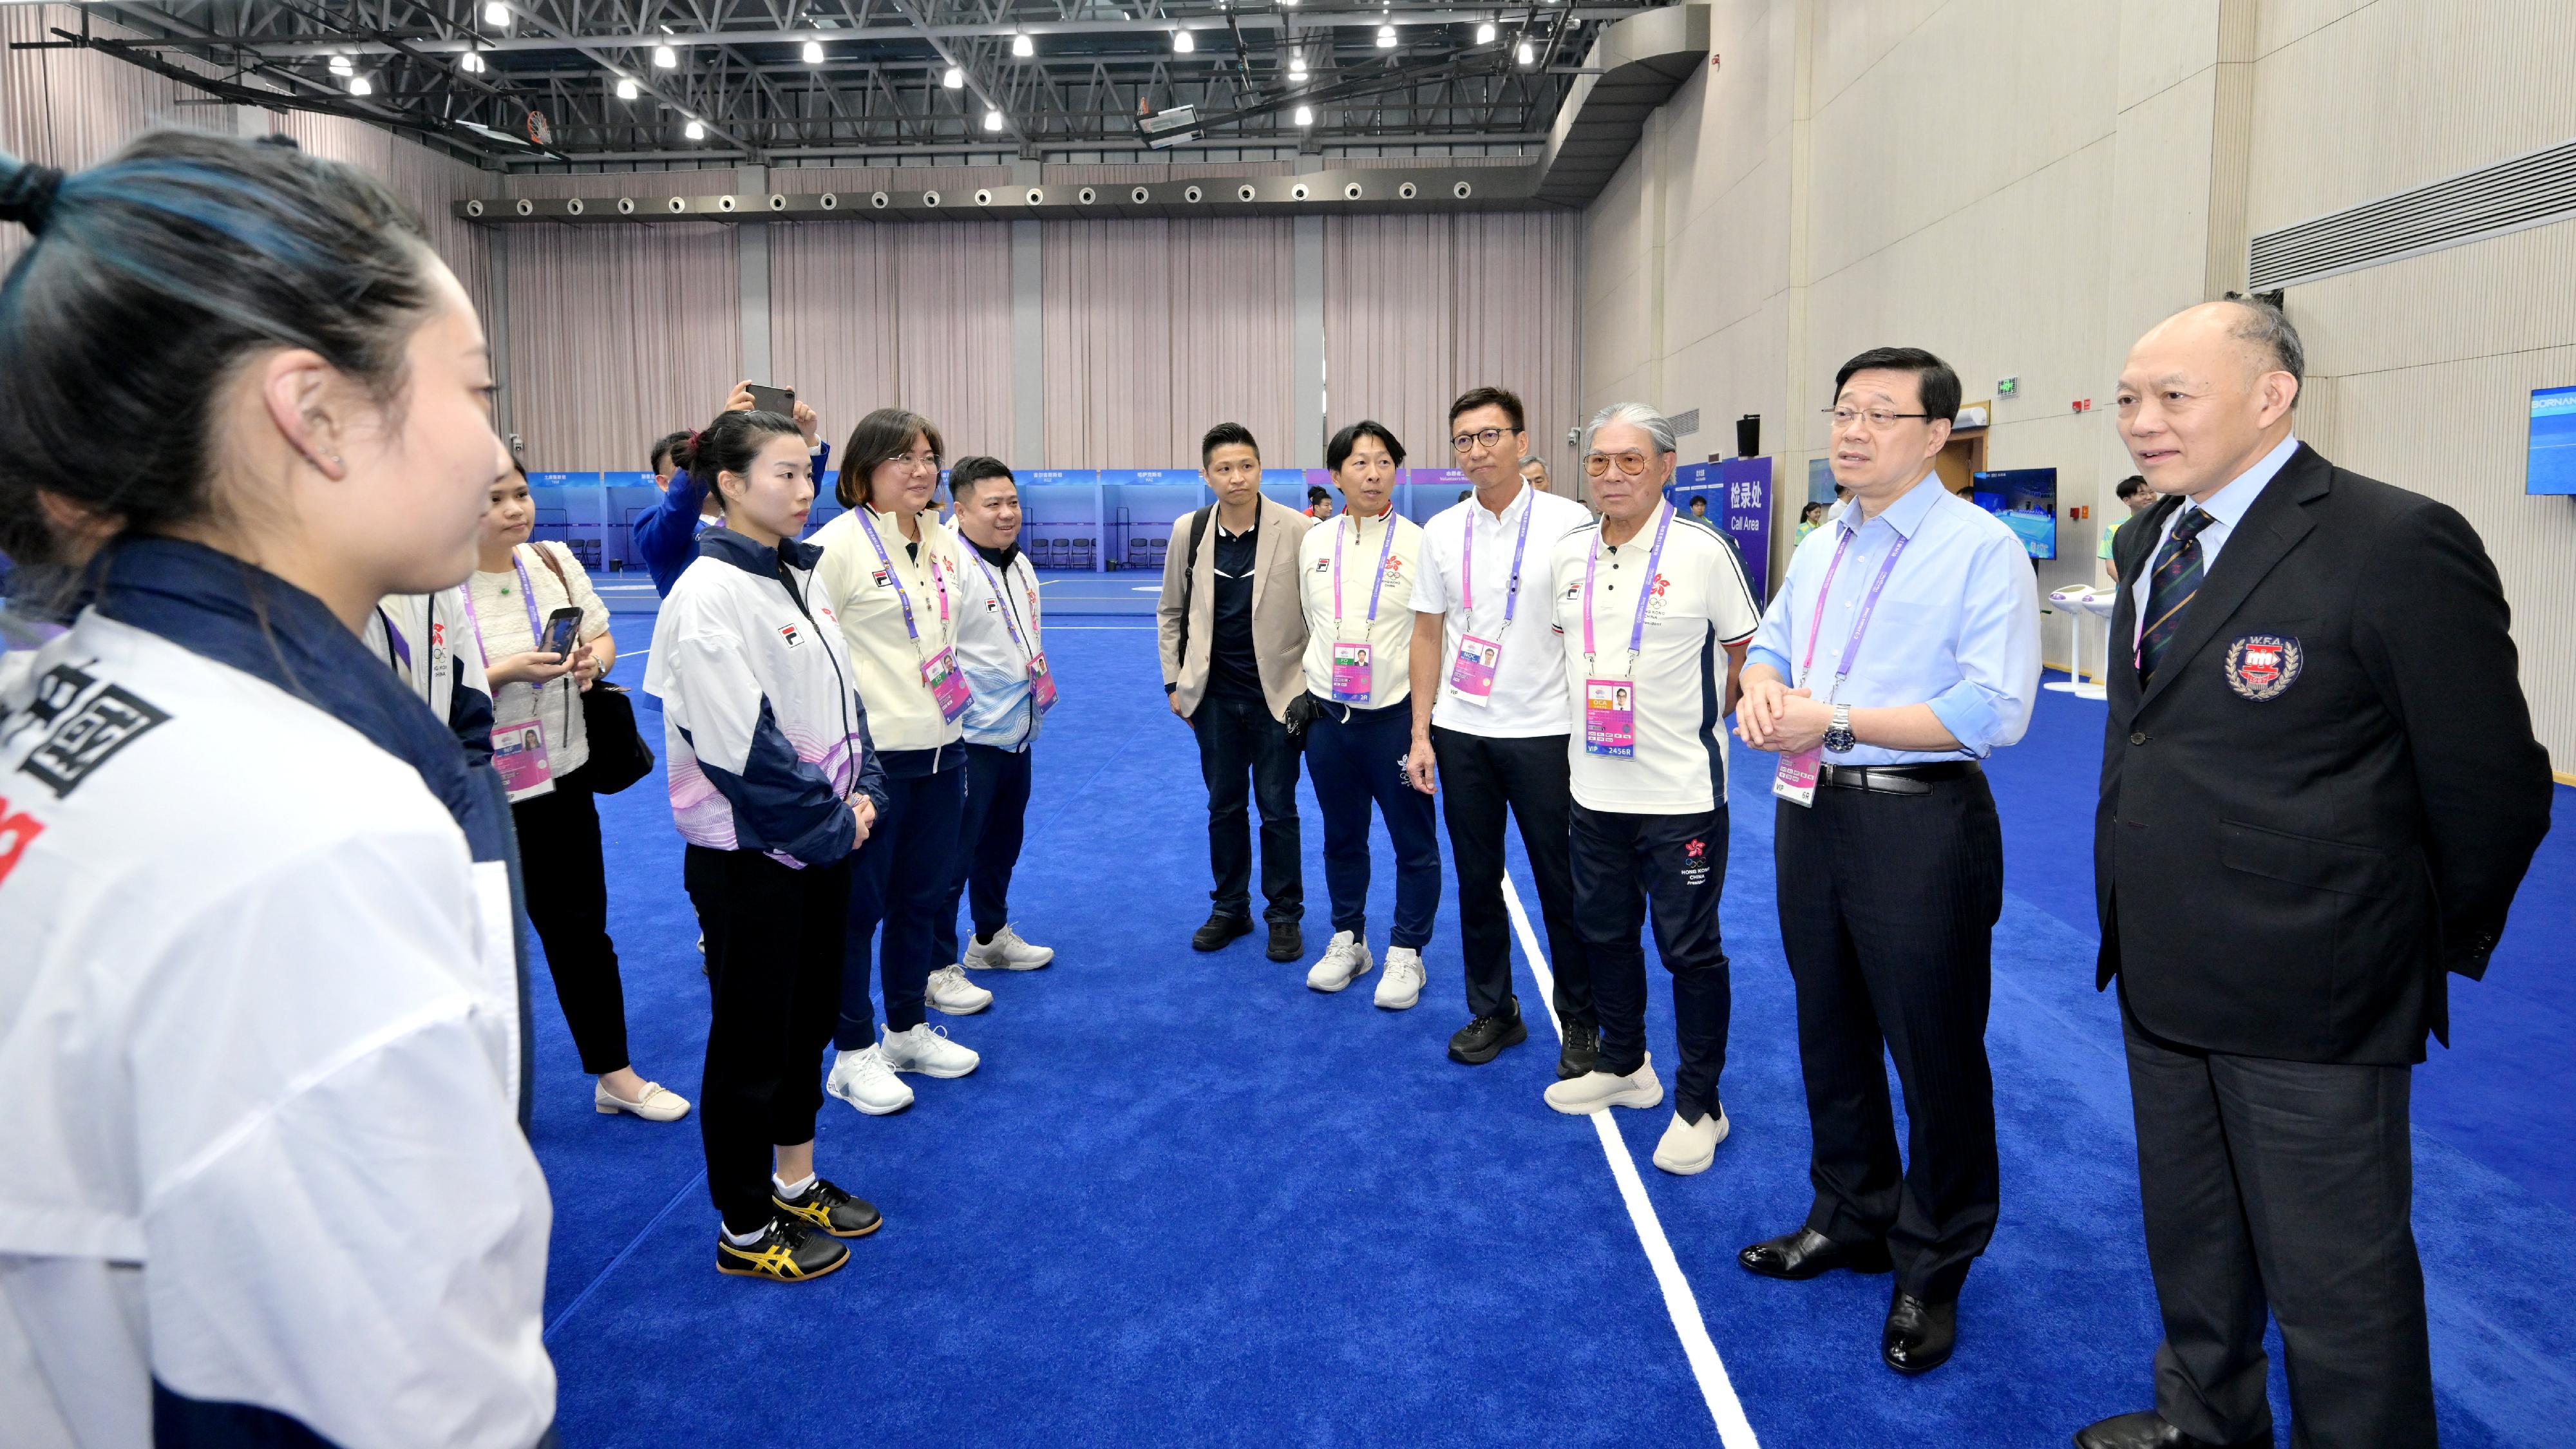 The Chief Executive, Mr John Lee, led a Hong Kong Special Administrative Region Government delegation to Hangzhou and continued his visit programme today (September 24). Photo shows (from second right) Mr Lee; the President of the Sports Federation & Olympic Committee of Hong Kong, China, Mr Timothy Fok, and the Commissioner for Sports in the Culture, Sports and Tourism Bureau, Mr Sam Wong, chatting with Hong Kong wushu athletes.